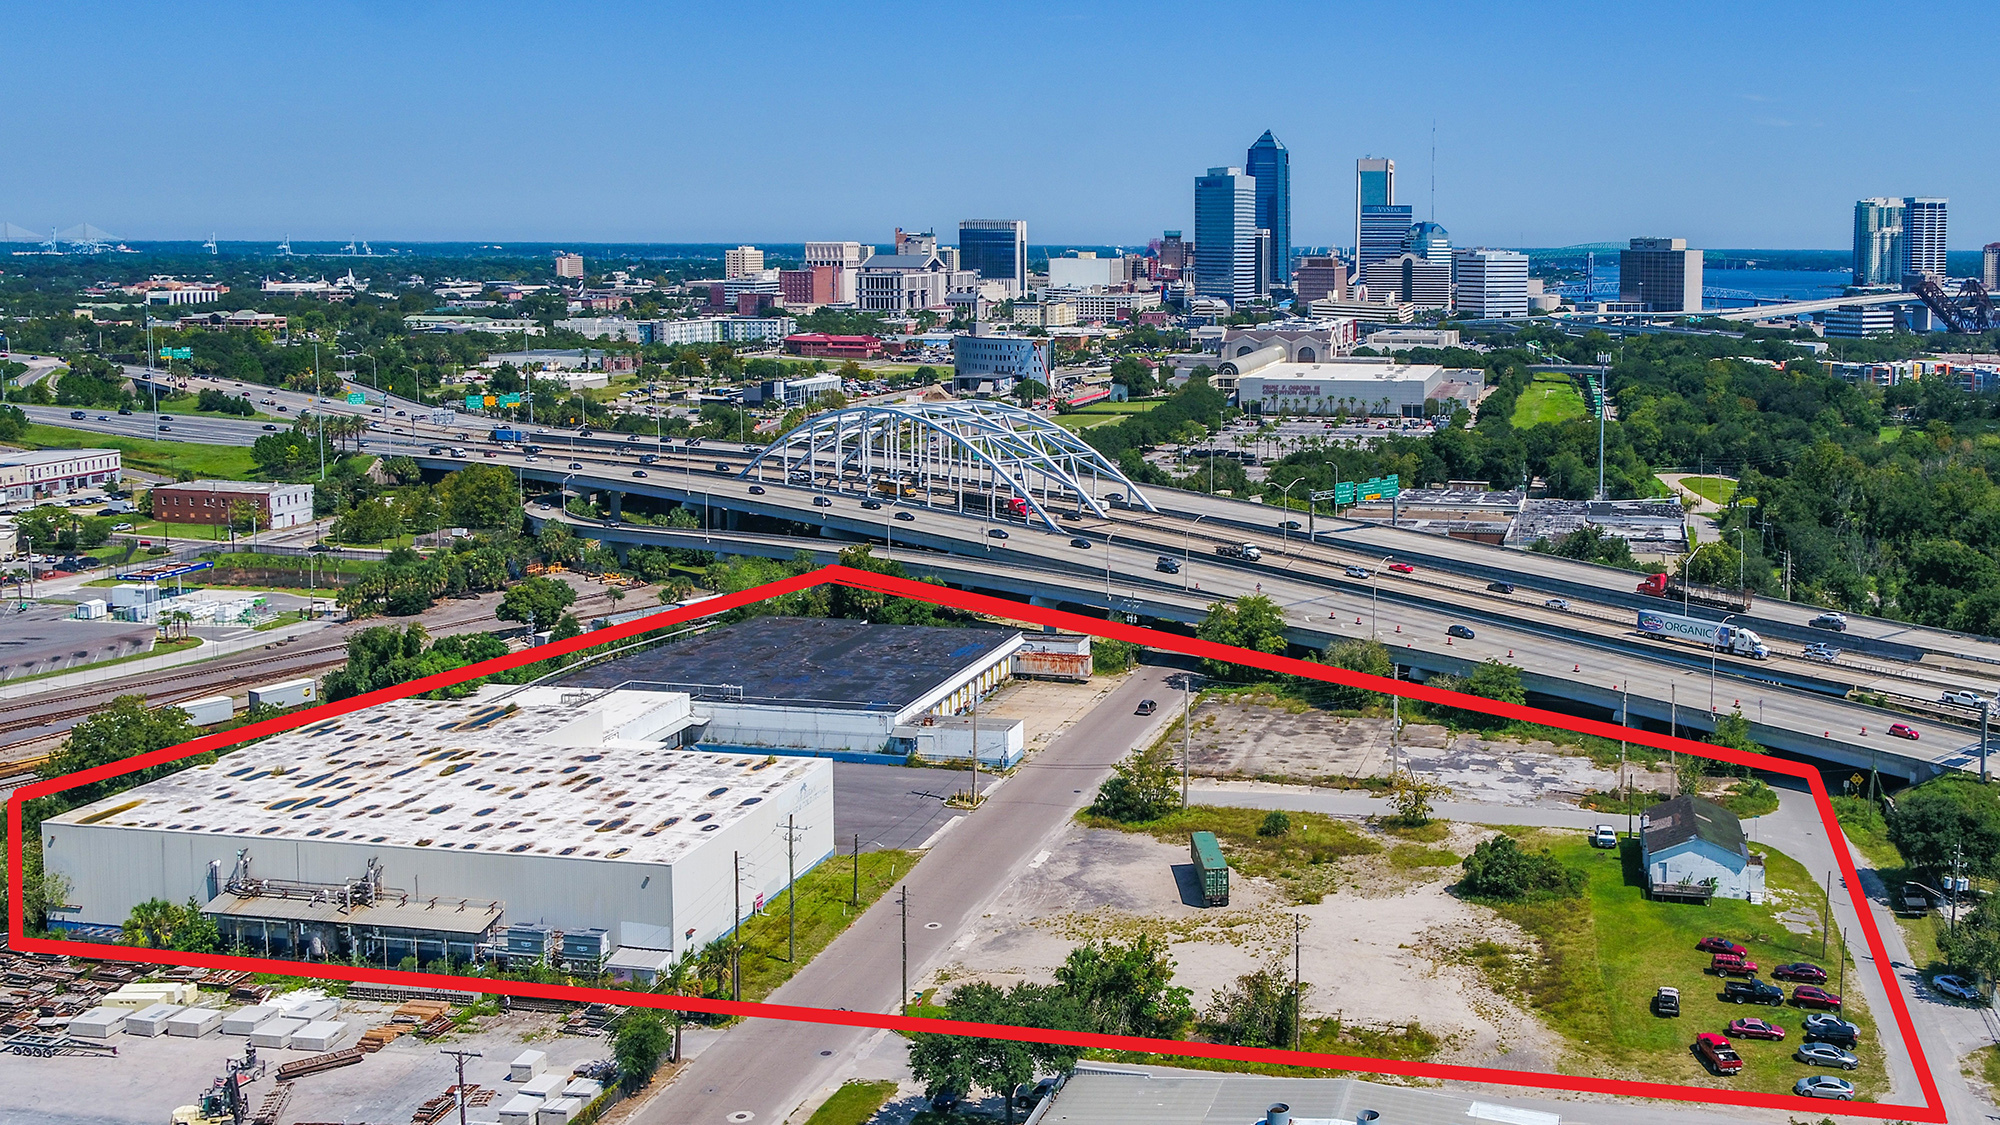 Dennis + Ives is planned on 5½ acres at 1505 Dennis St. The project gets its name from the cross streets. The property is adjacent to Interstate 95 near Downtown.